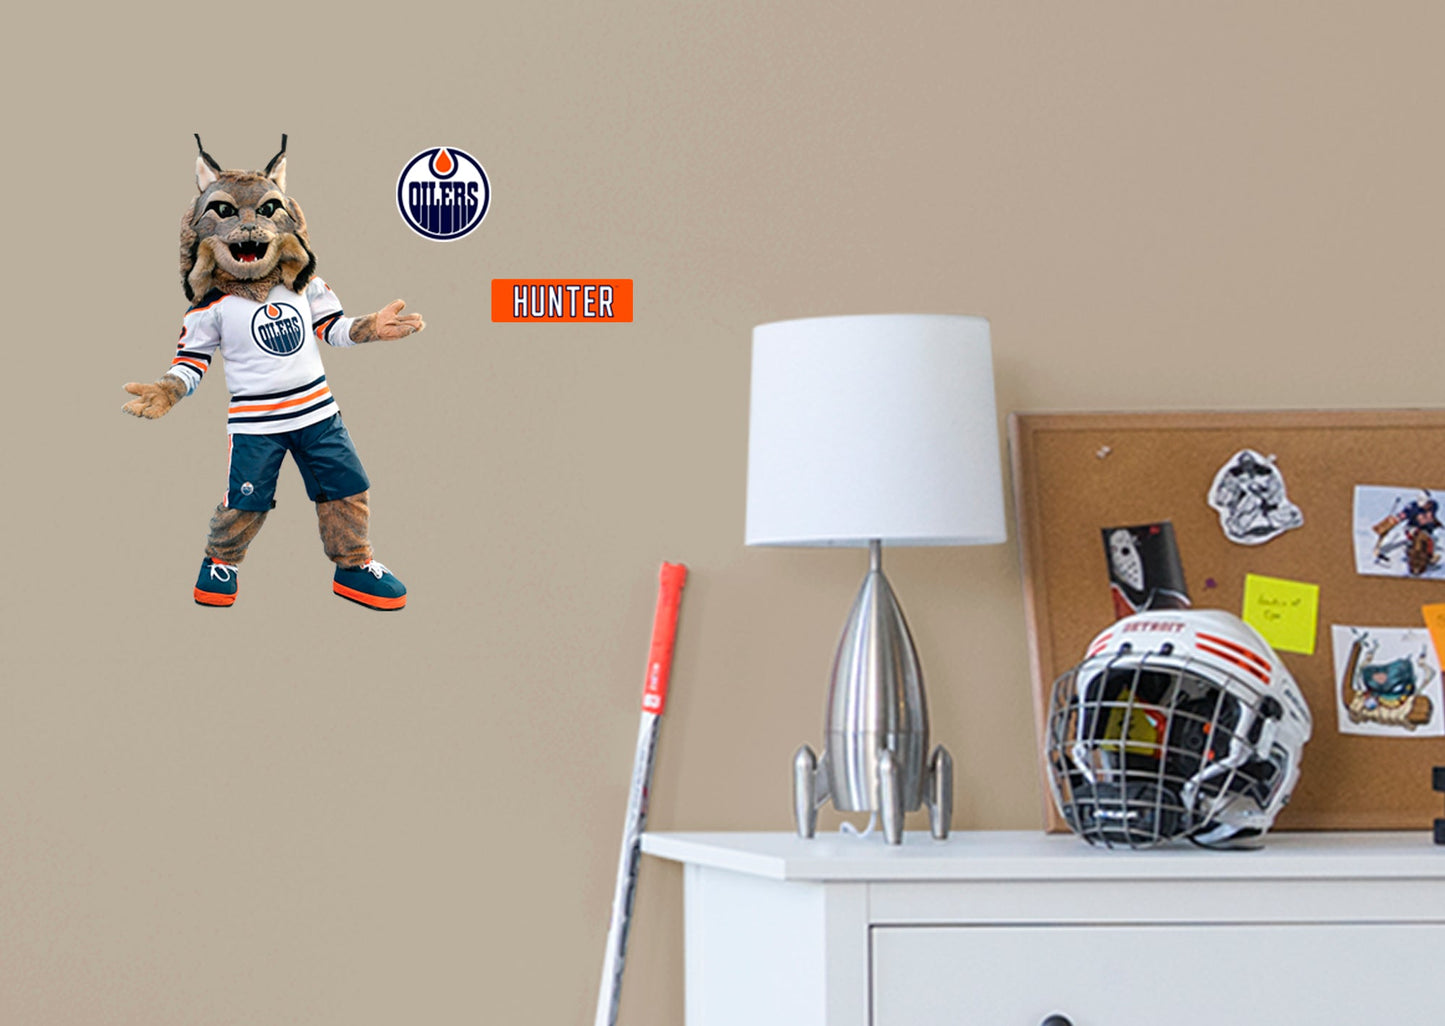 Edmonton Oilers: Hunter  Mascot        - Officially Licensed NHL Removable     Adhesive Decal